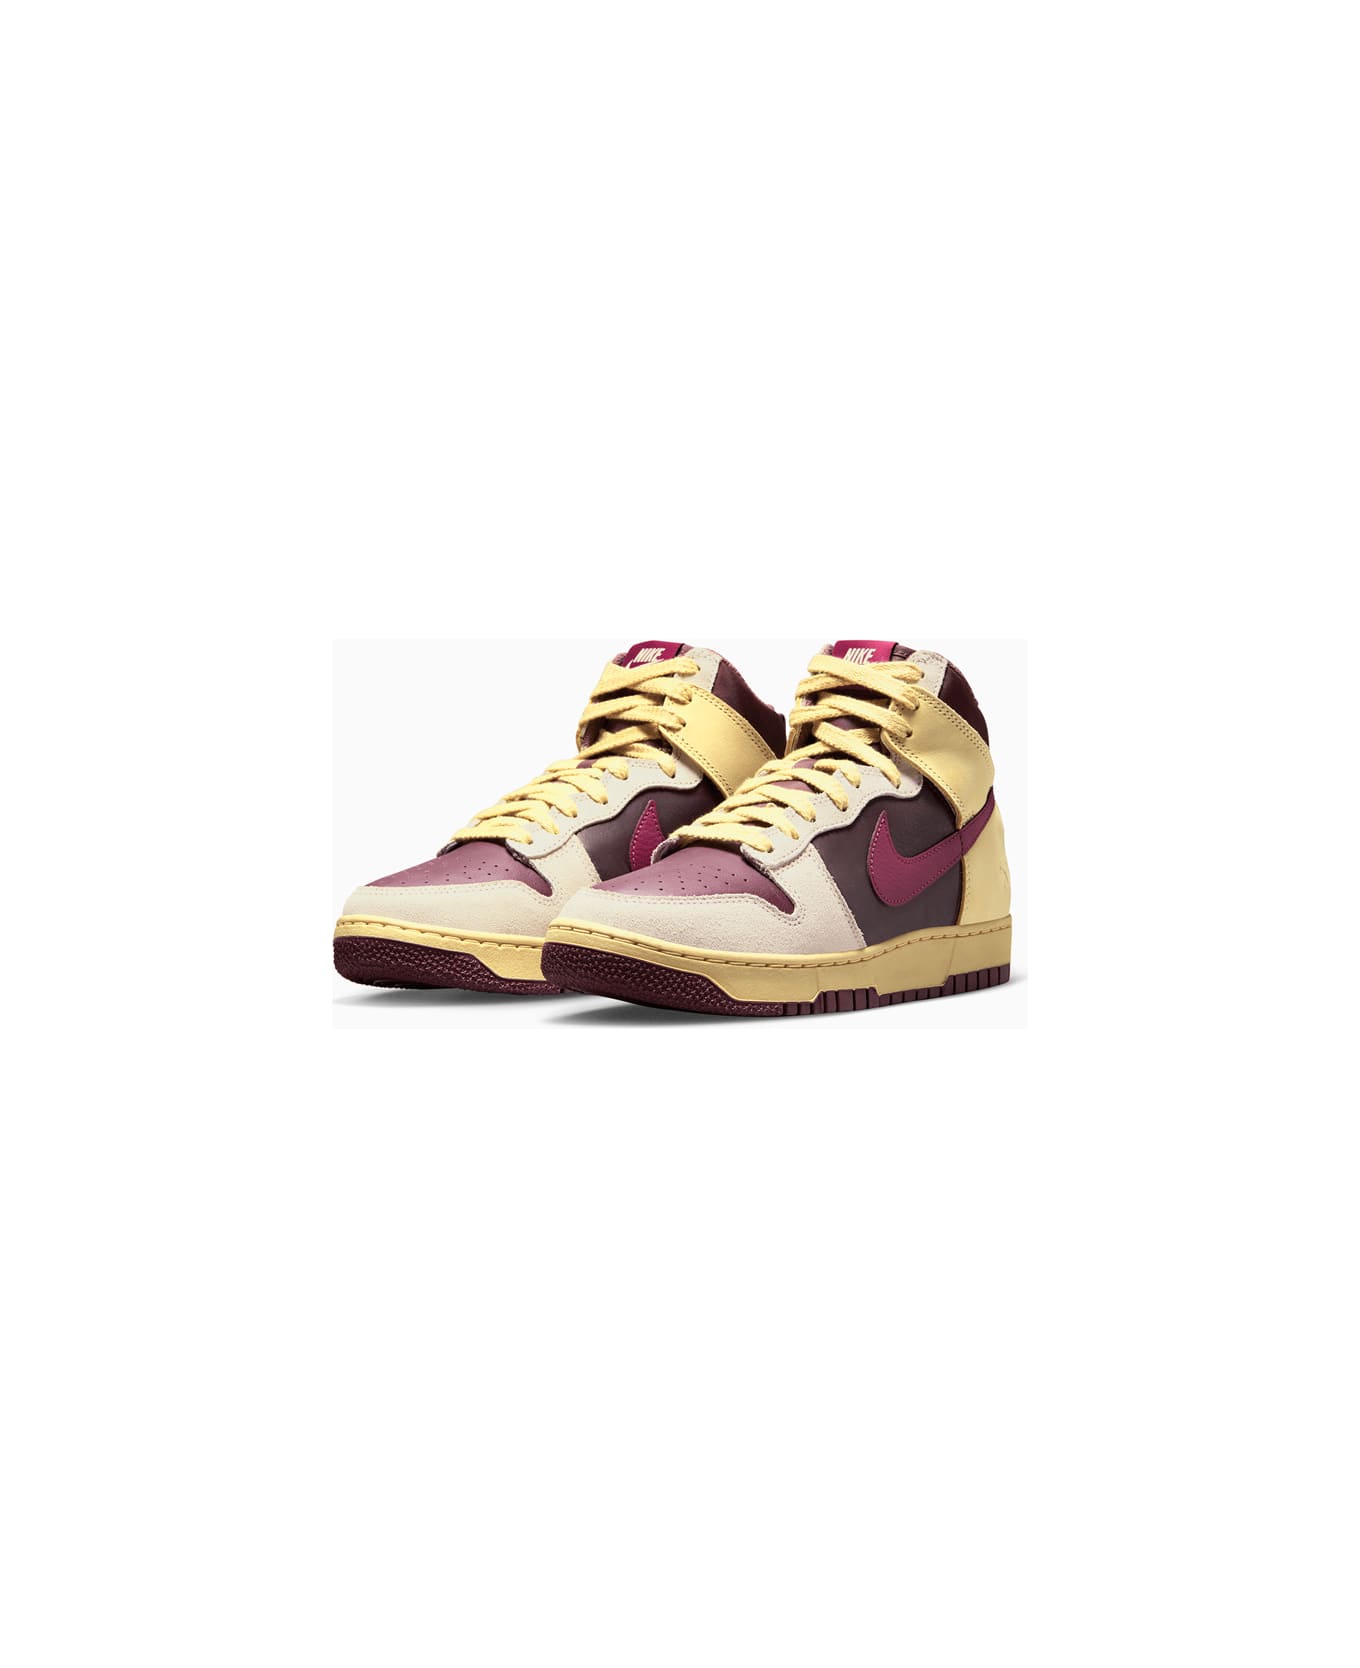 Nike Dunk High 1985 Sneakers Fd0794-700 - Multiple colors